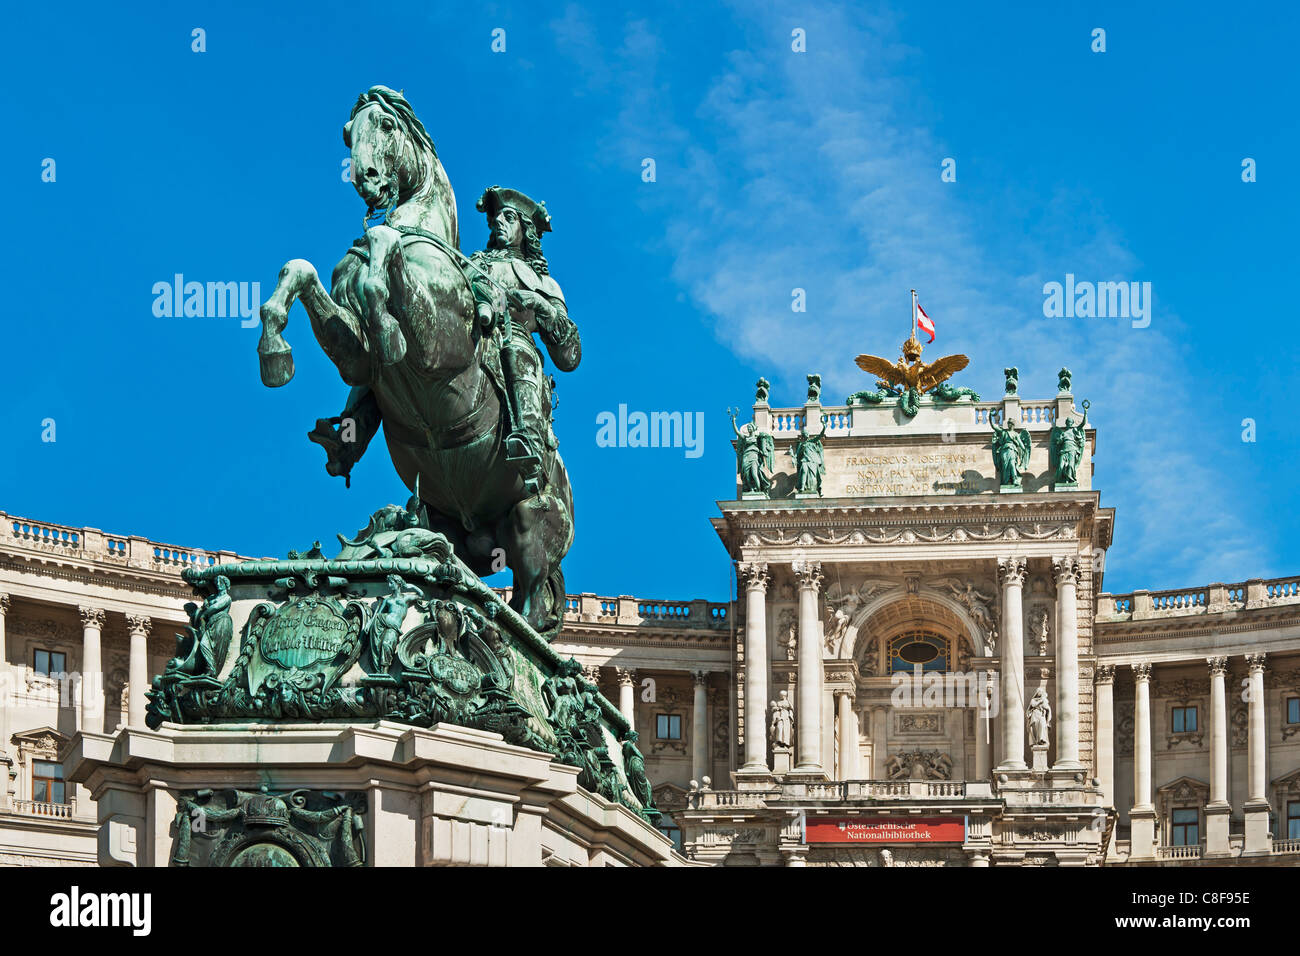 Hofburg Palace, In front of the new Castle is the Equestrian statue of Prince Eugene of Savoy, Vienna, Austria, Europe Stock Photo